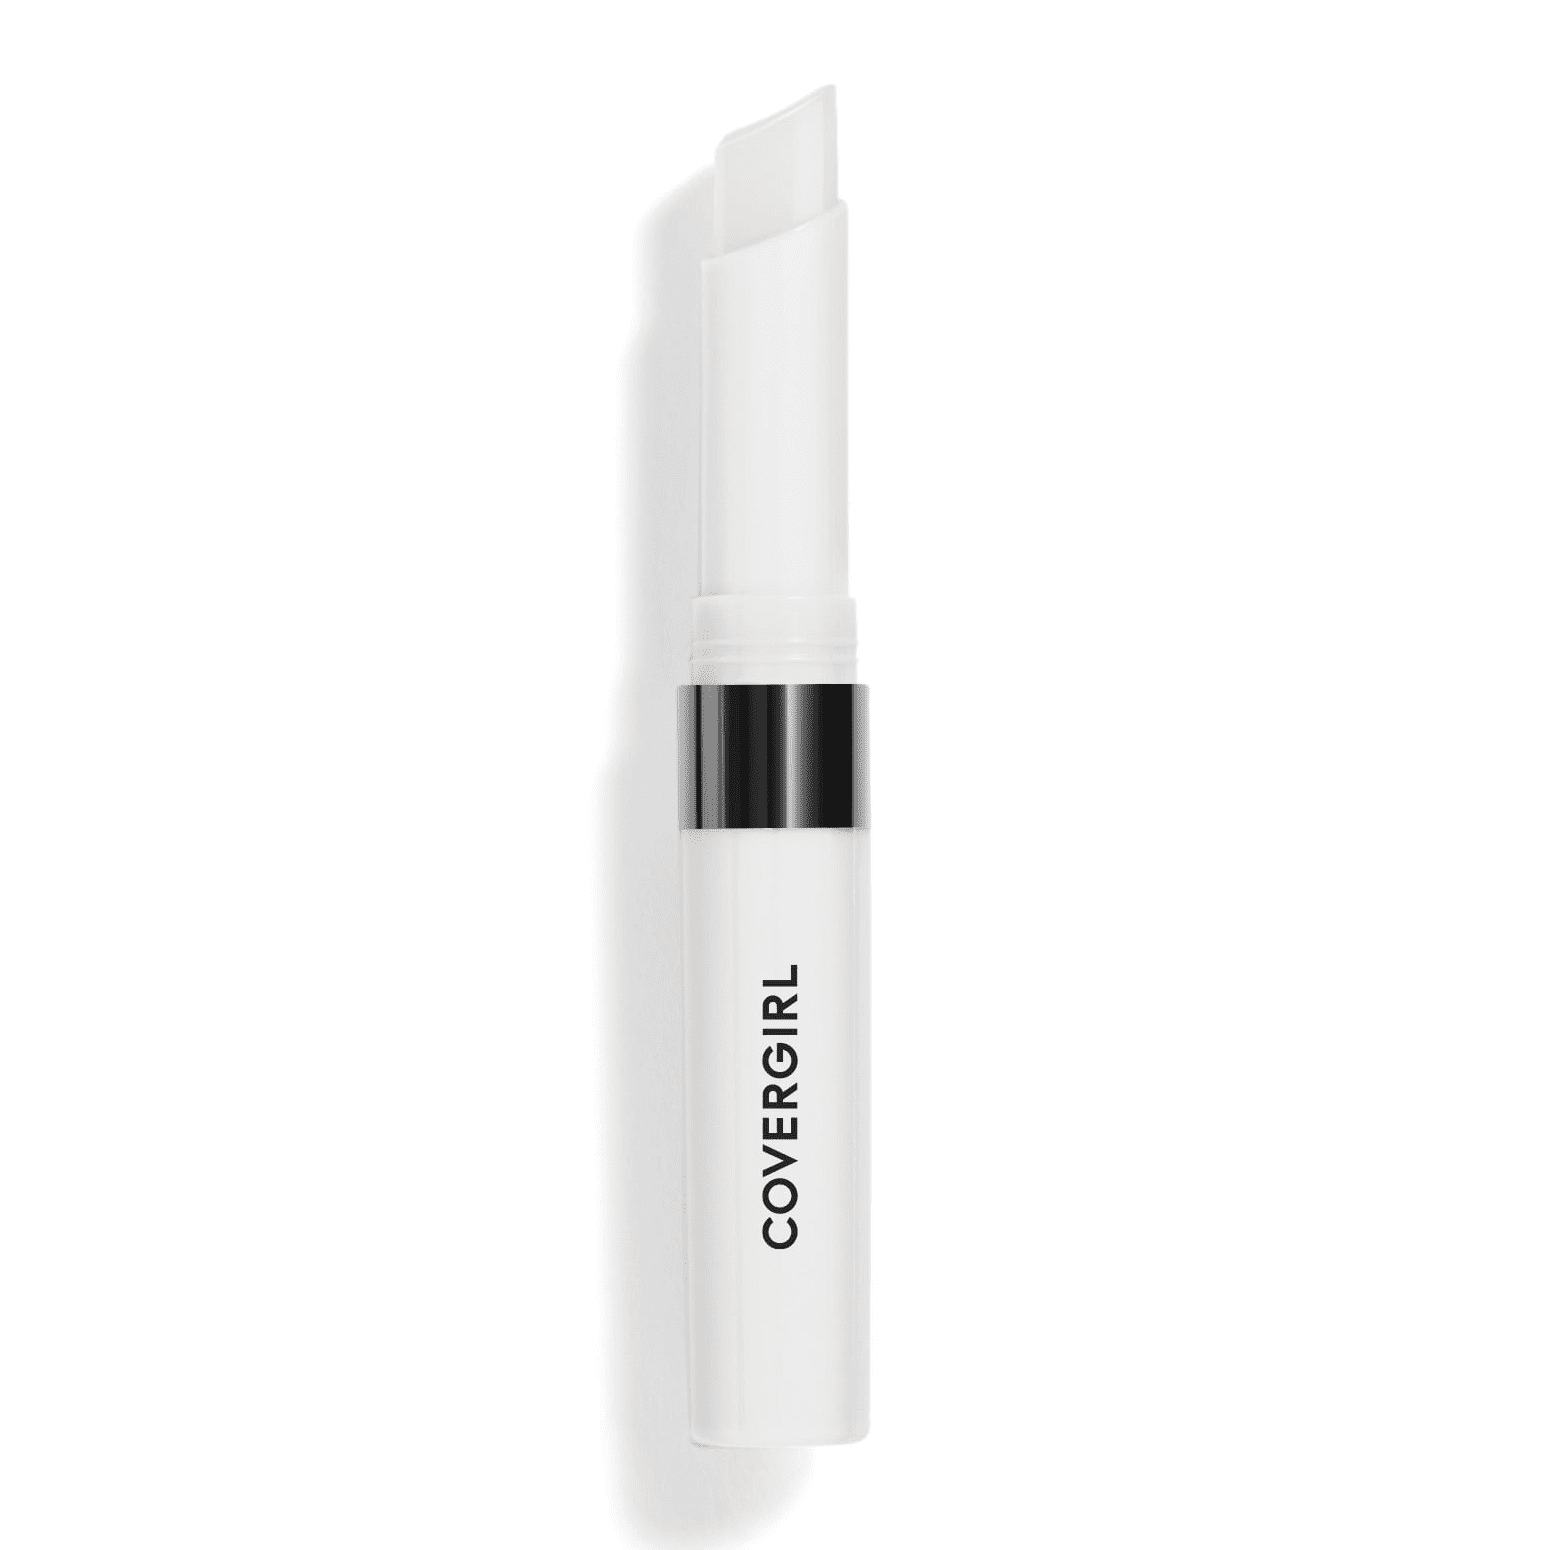 COVERGIRL Outlast All-Day Lip Color Top Coat, Clear, Shiny Lip Gloss, Pack of 1 ,Stays On All Day, Moisturizing Formula, Cruelty Free, Easy Two-Step Process